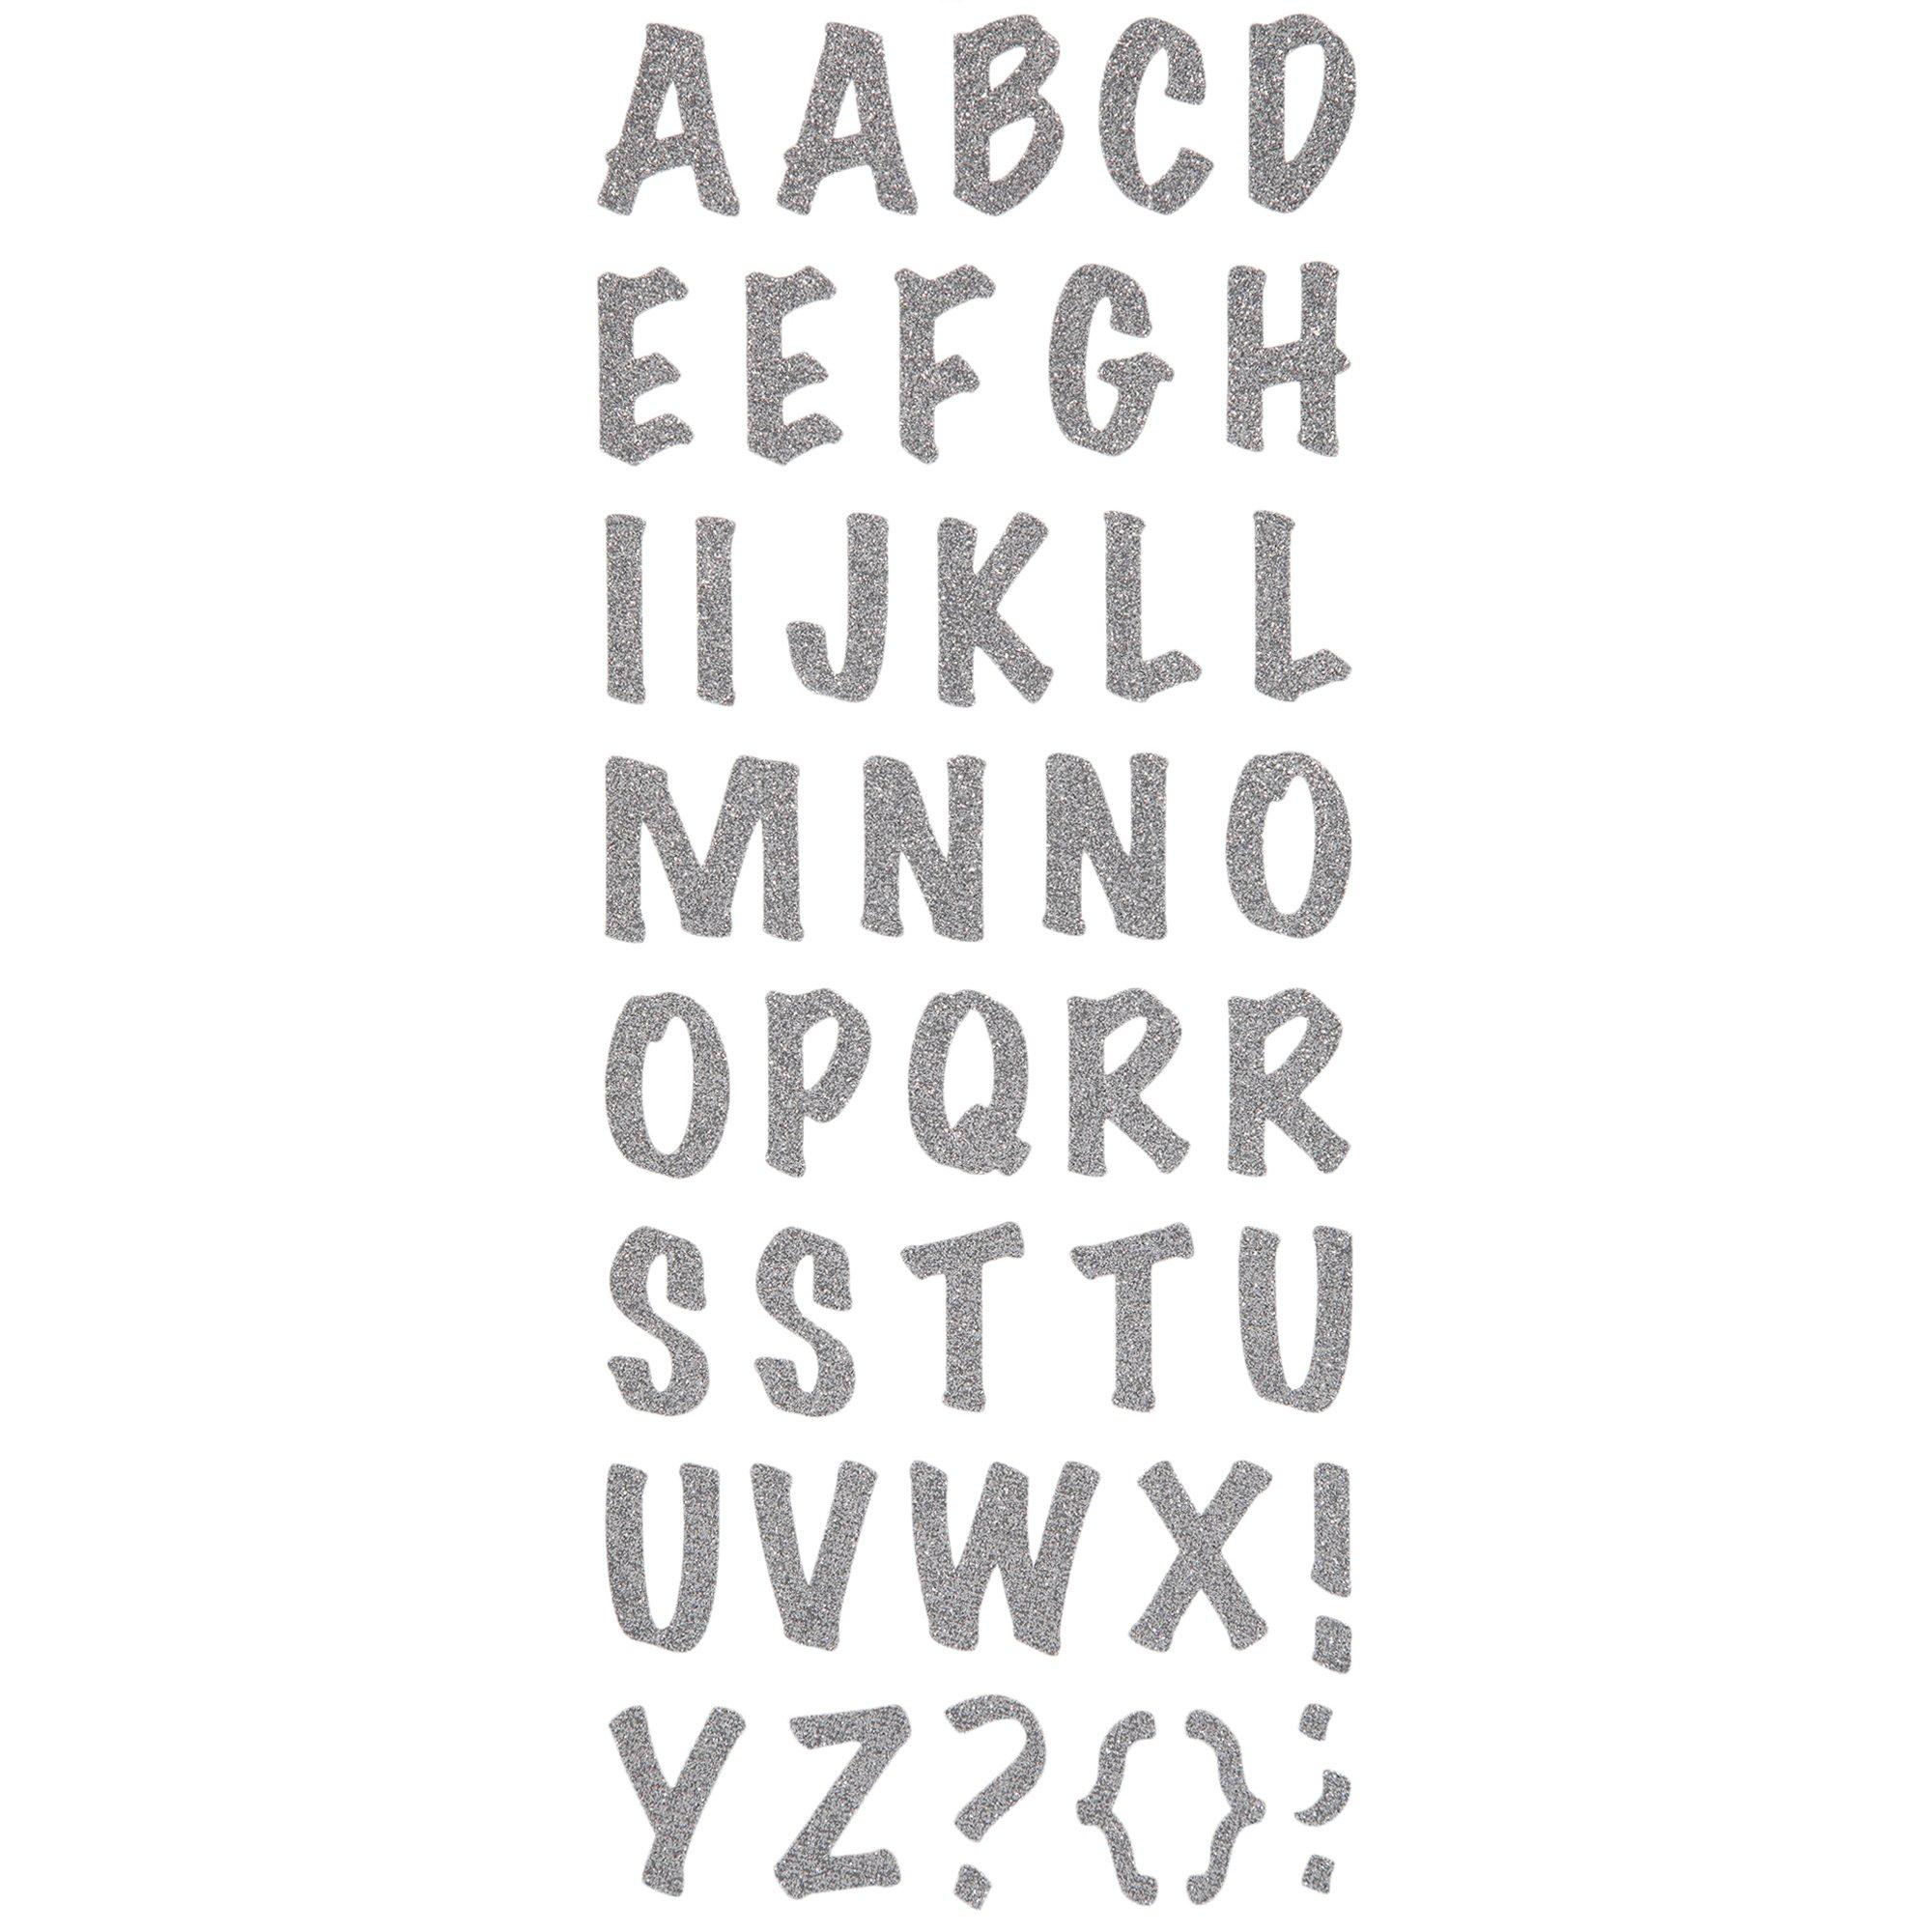 Franklin Alphabet Stickers, Gold Glitter, 3 1/2 inches, 65 Stickers, Mardel